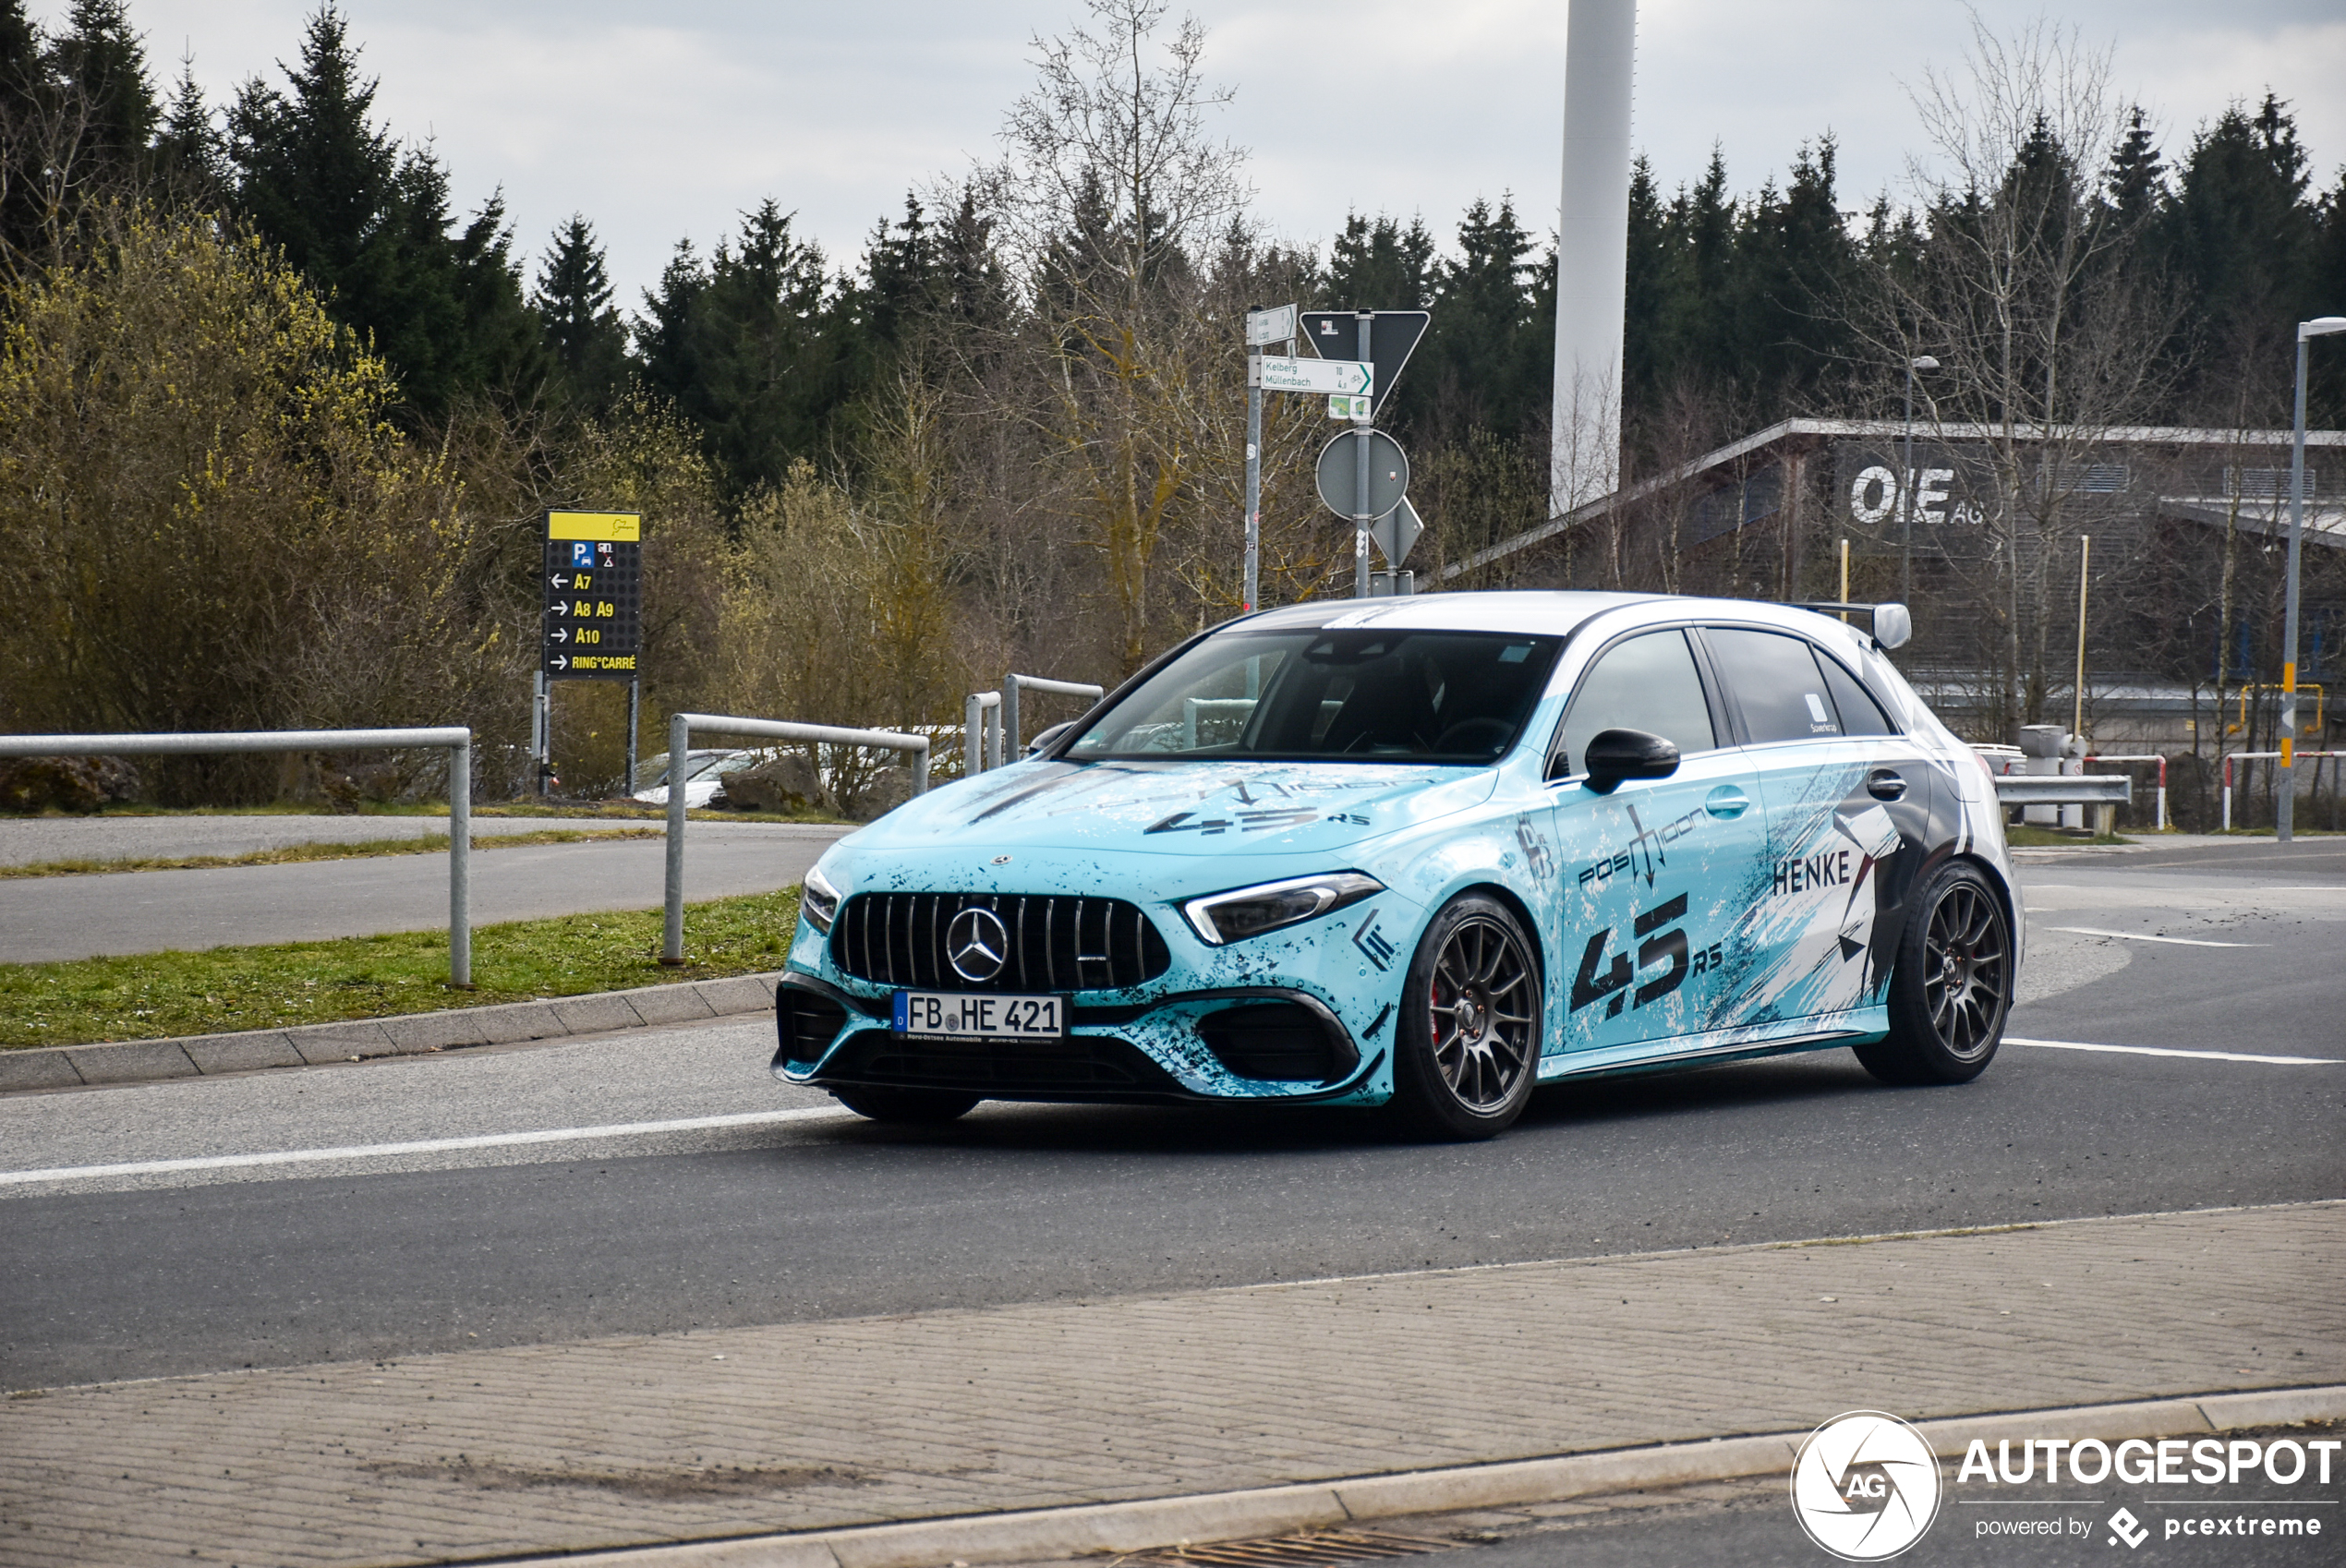 Mercedes-AMG A 45 S W177 Posaidon RS525+